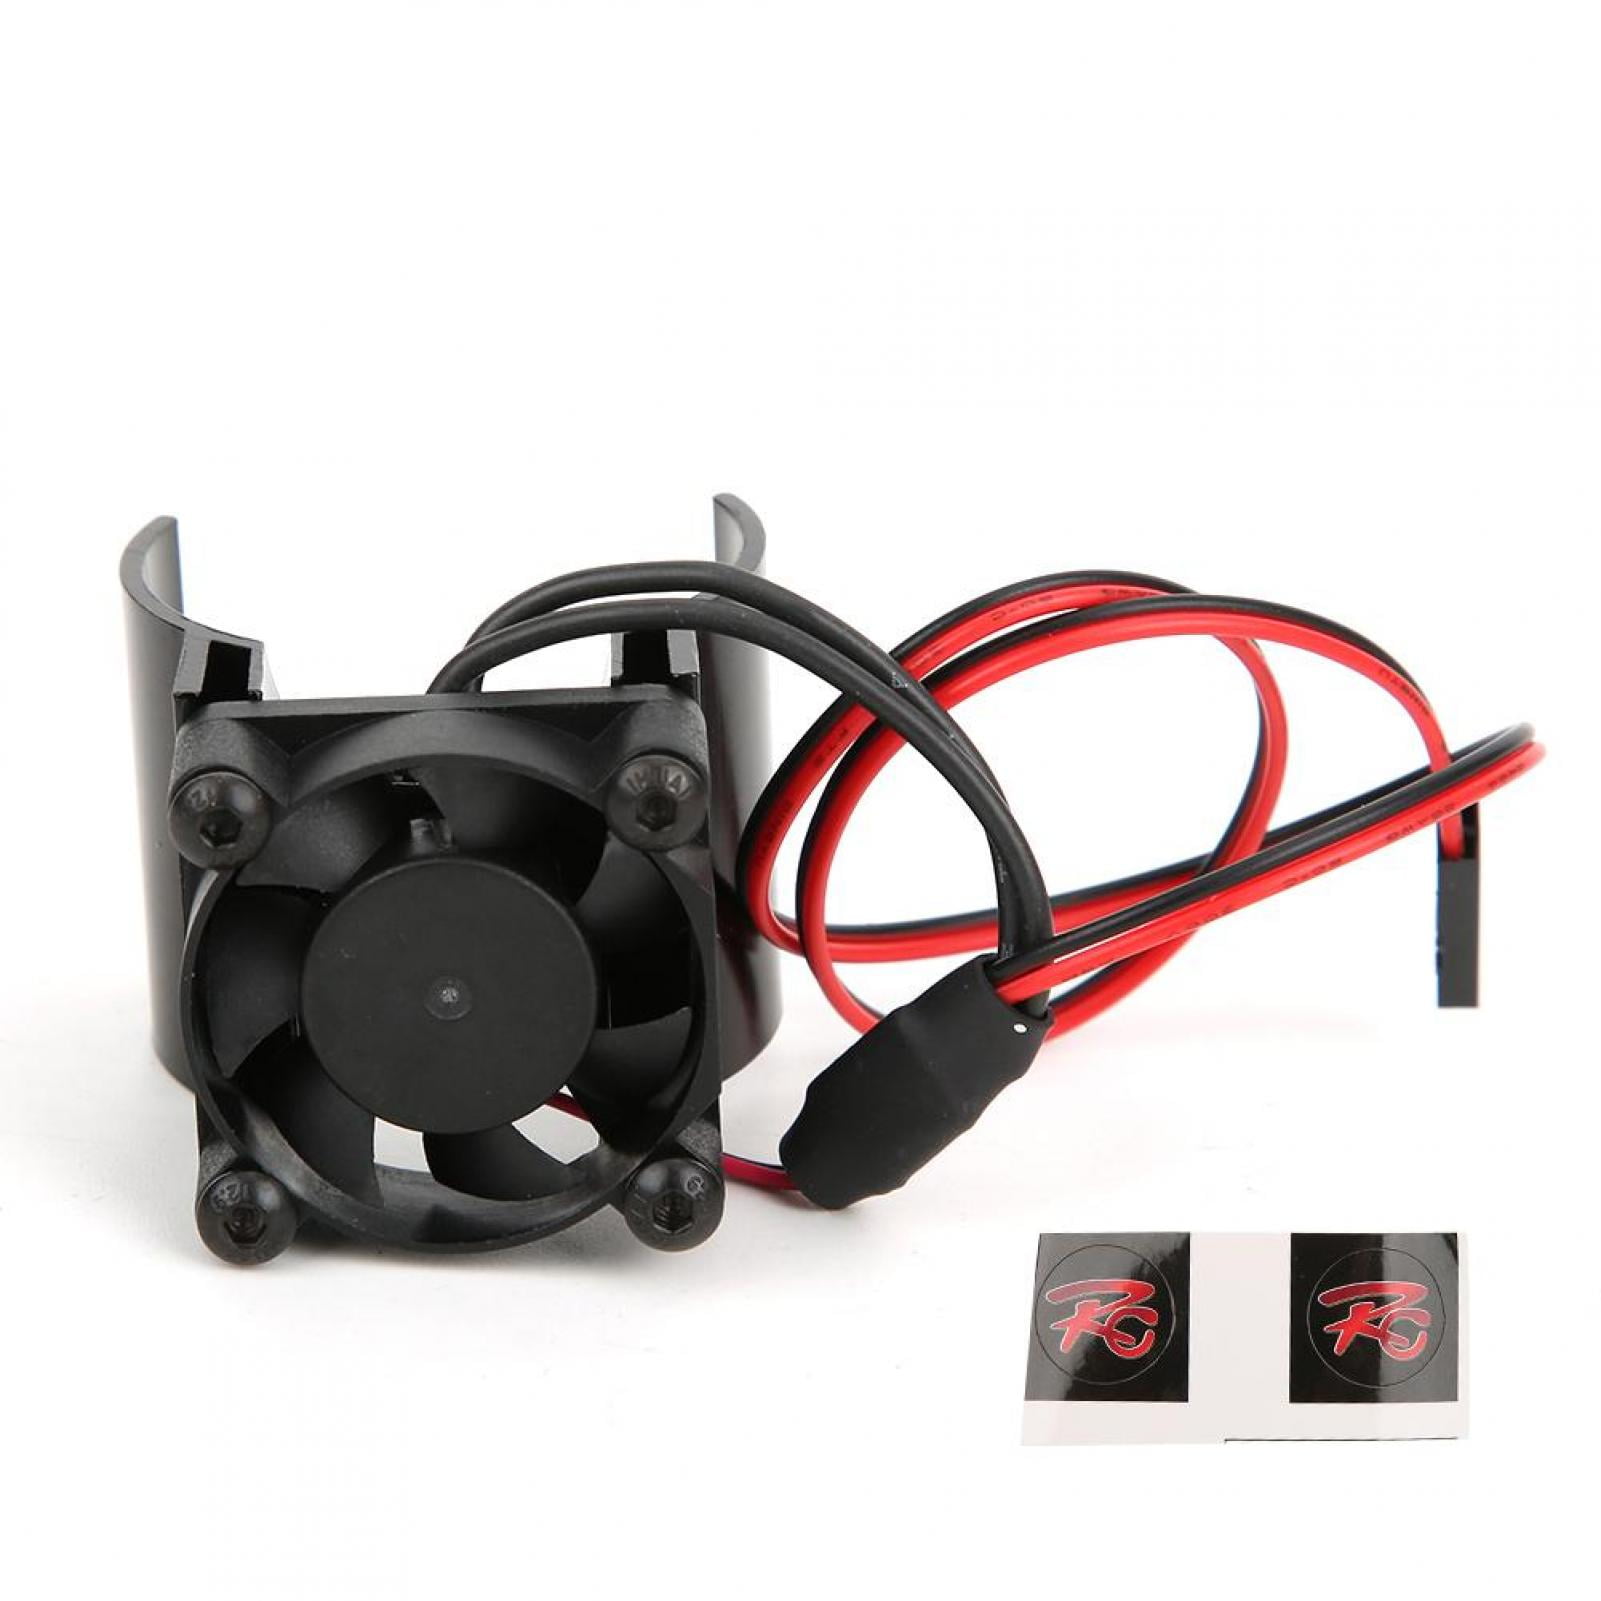 Dilwe RC Cooling Fan 1/10 RC Car Model Accessory Motor Heat Sink Cooling Fan Compatible with Traxxas TRX-4 Silver 